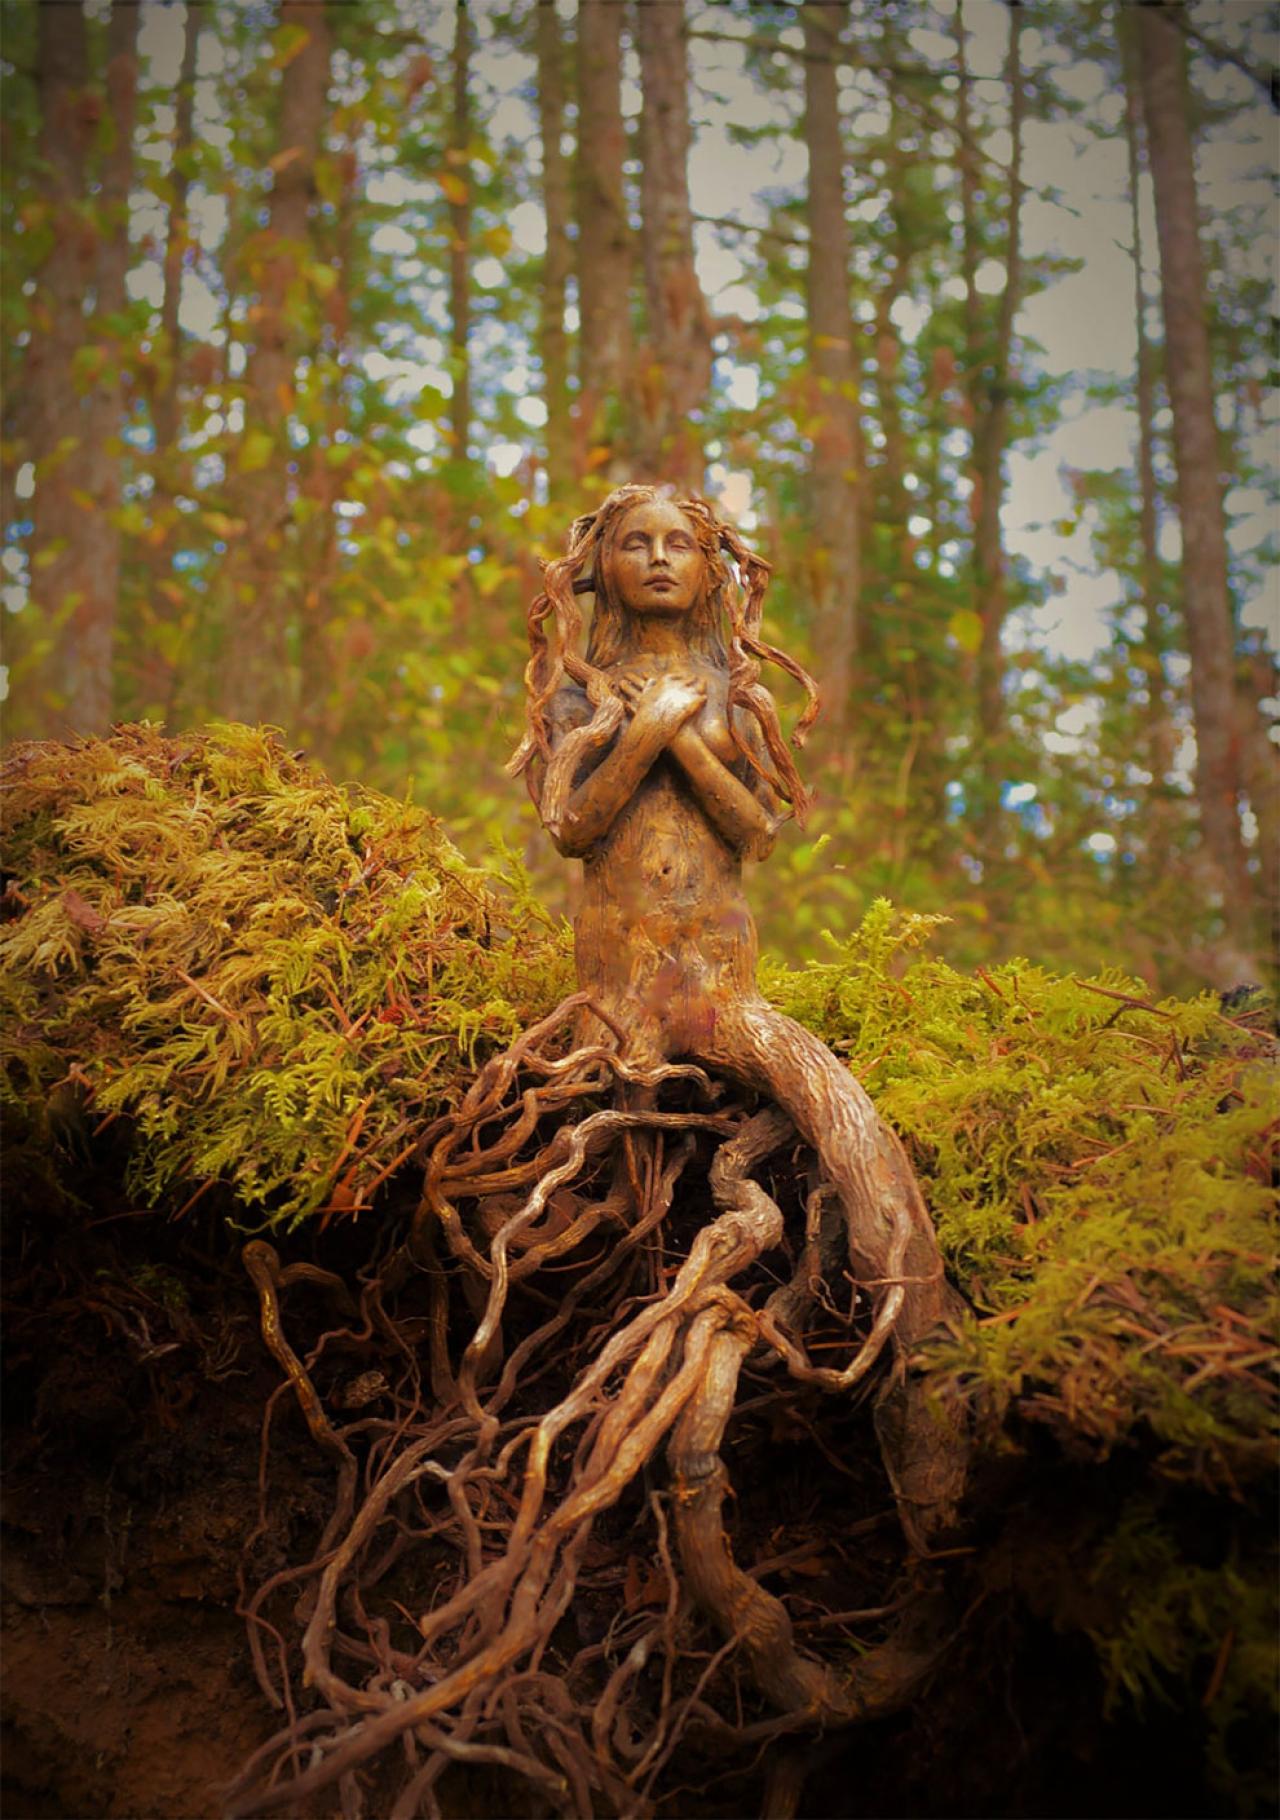 Amazing Wood Art That Will Make You Disbelief Your Eyes